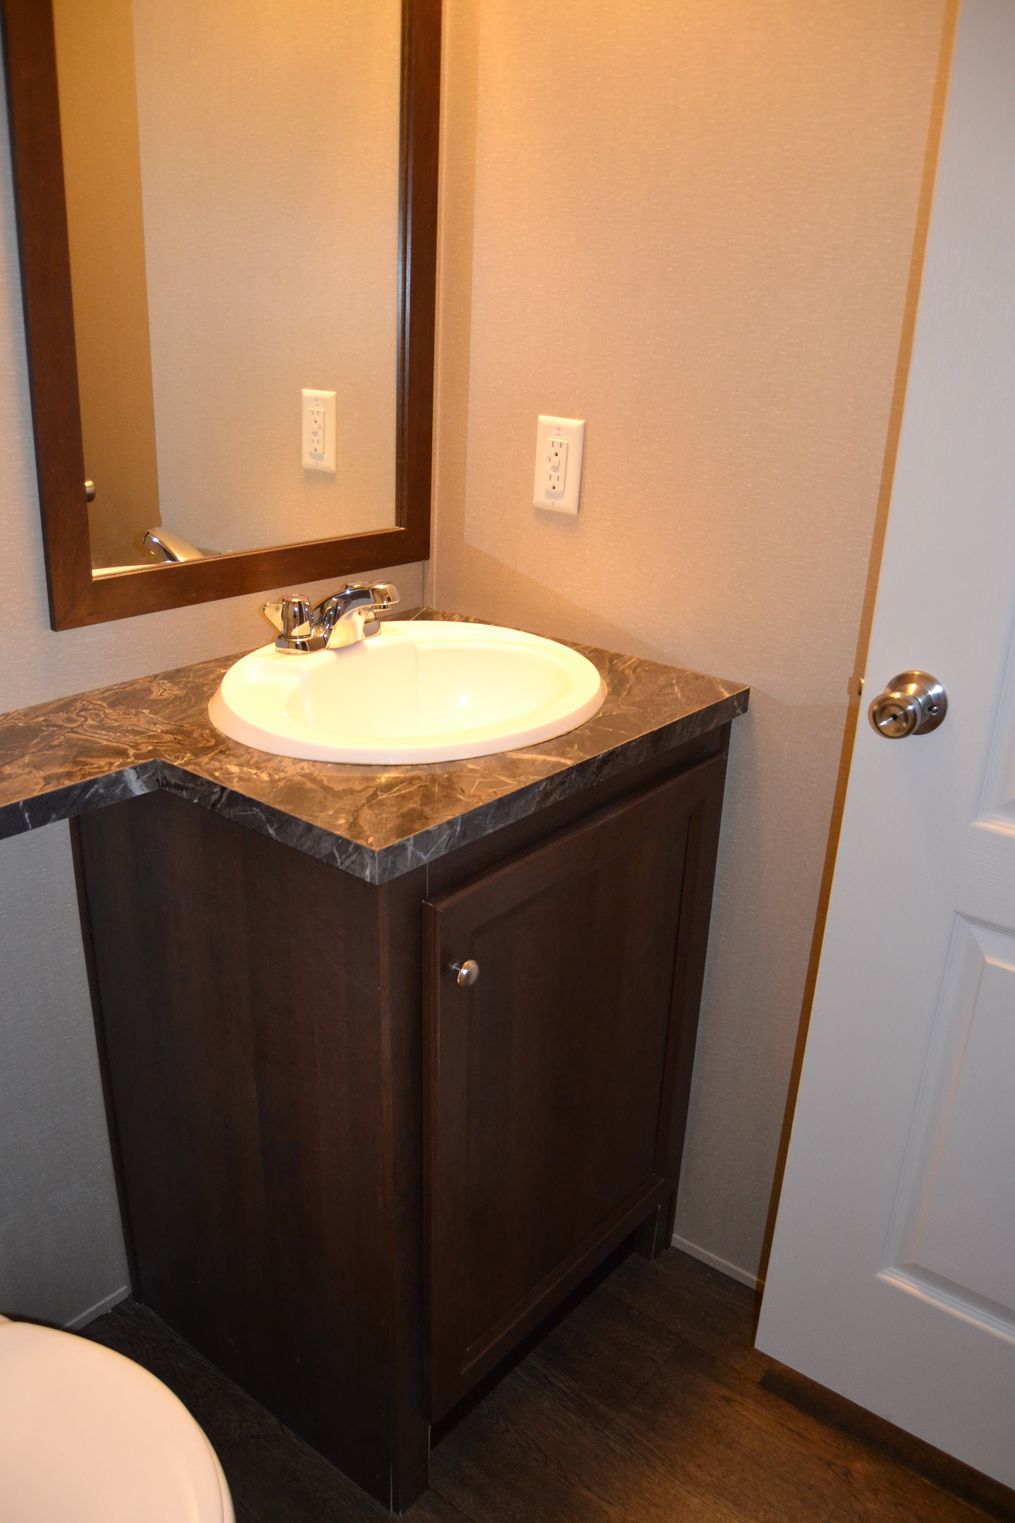 The MAPLE 7014-660 Primary Bathroom. This Manufactured Mobile Home features 3 bedrooms and 2 baths.